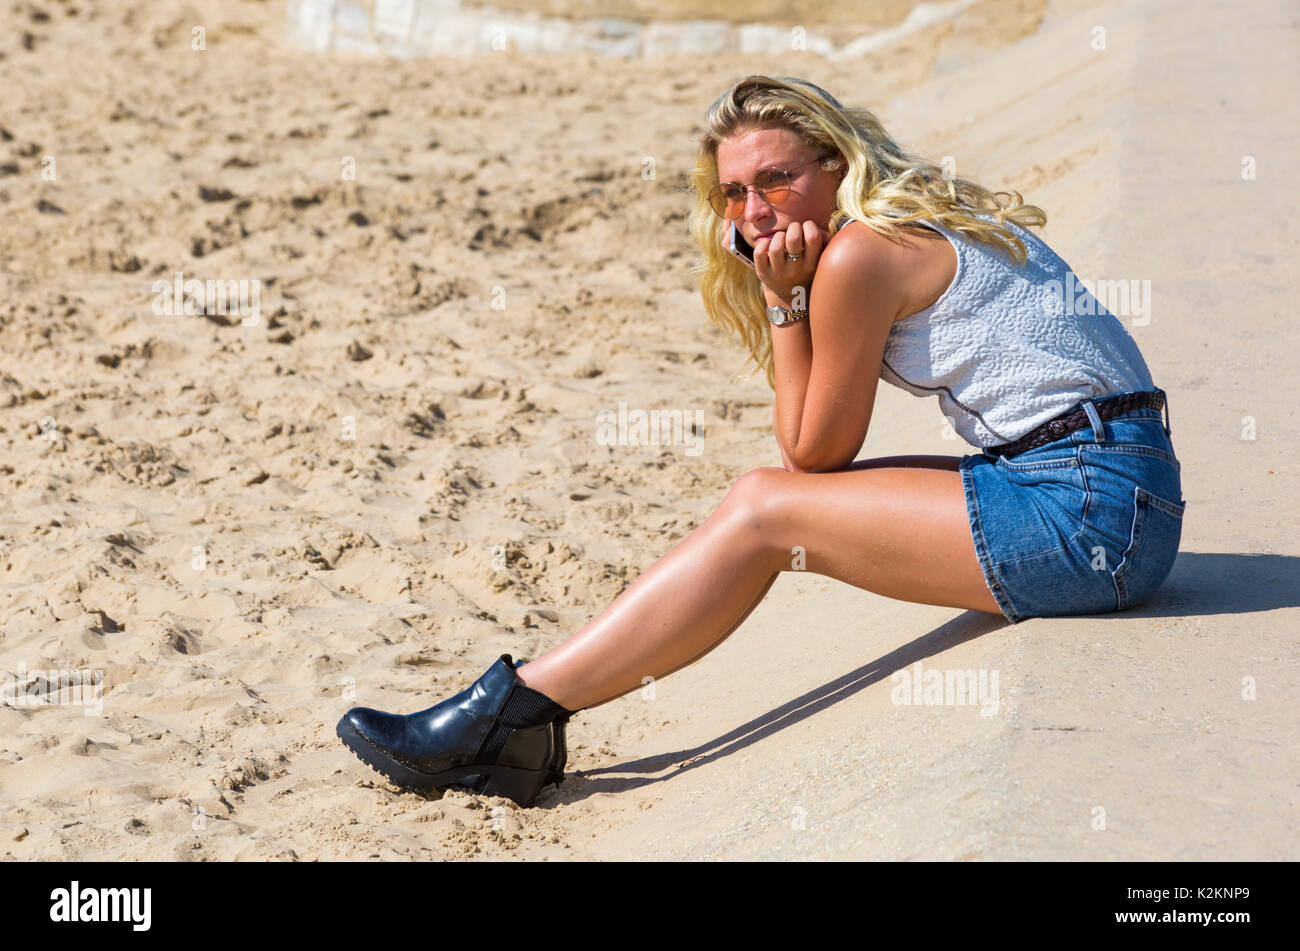 Bournemouth, Dorset, UK. 1st Sep, 2017. UK weather: lovely warm sunny day at Bournemouth beach - visitors get there early to get a good spot. Attractive young woman with long blond hair wearing mini denim skirt sitting by beach holding mobile phone to her ear.  Credit: Carolyn Jenkins/Alamy Live News Stock Photo